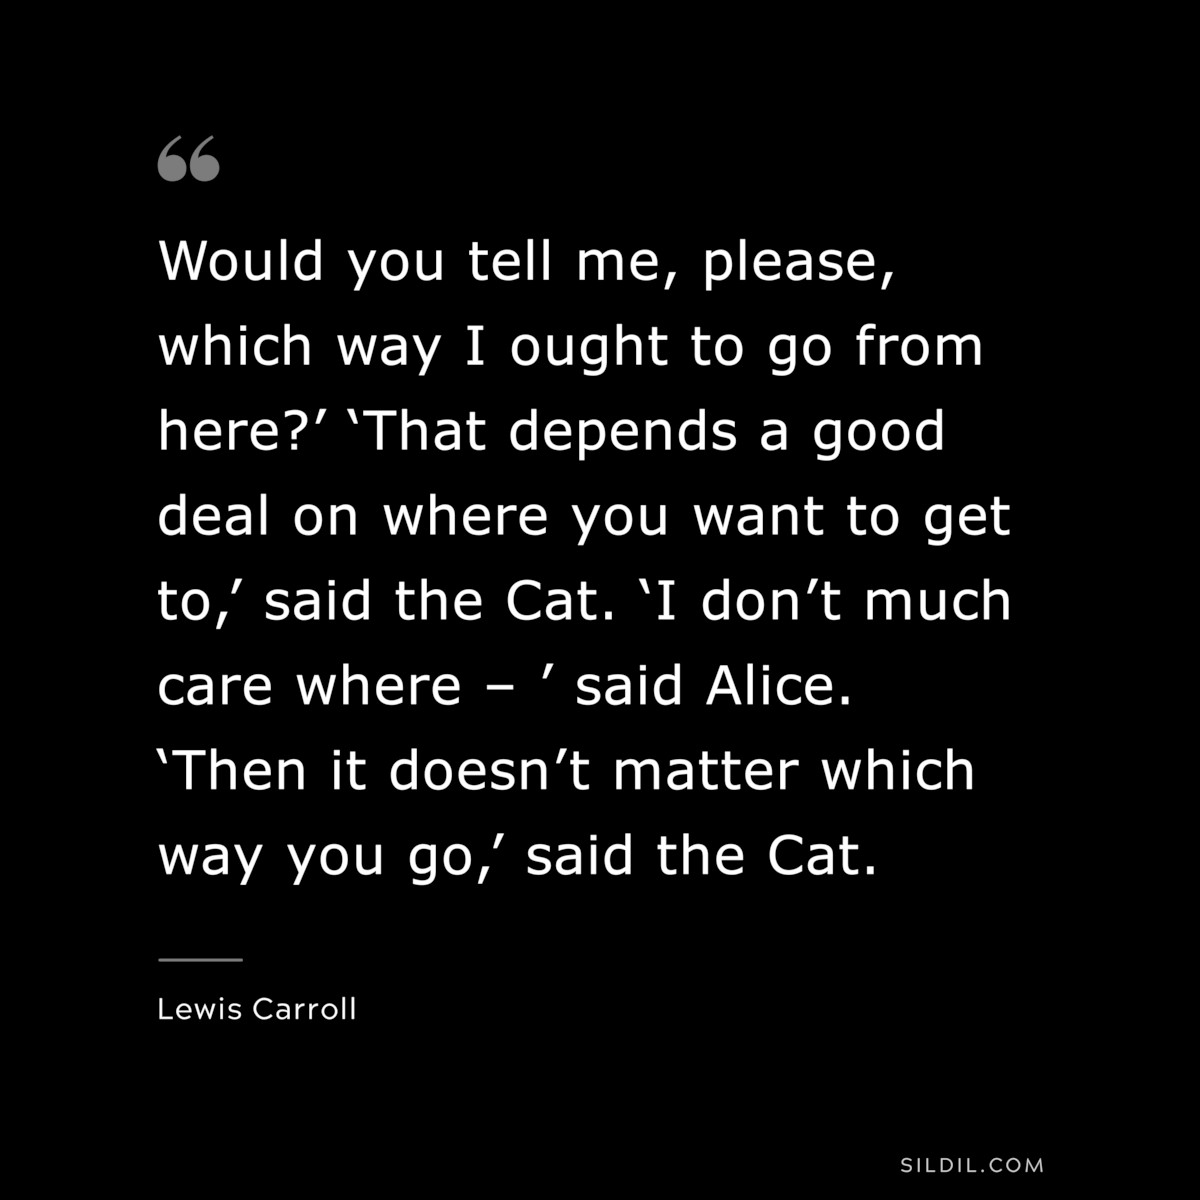 Would you tell me, please, which way I ought to go from here?’ ‘That depends a good deal on where you want to get to,’ said the Cat. ‘I don’t much care where – ’ said Alice. ‘Then it doesn’t matter which way you go,’ said the Cat.